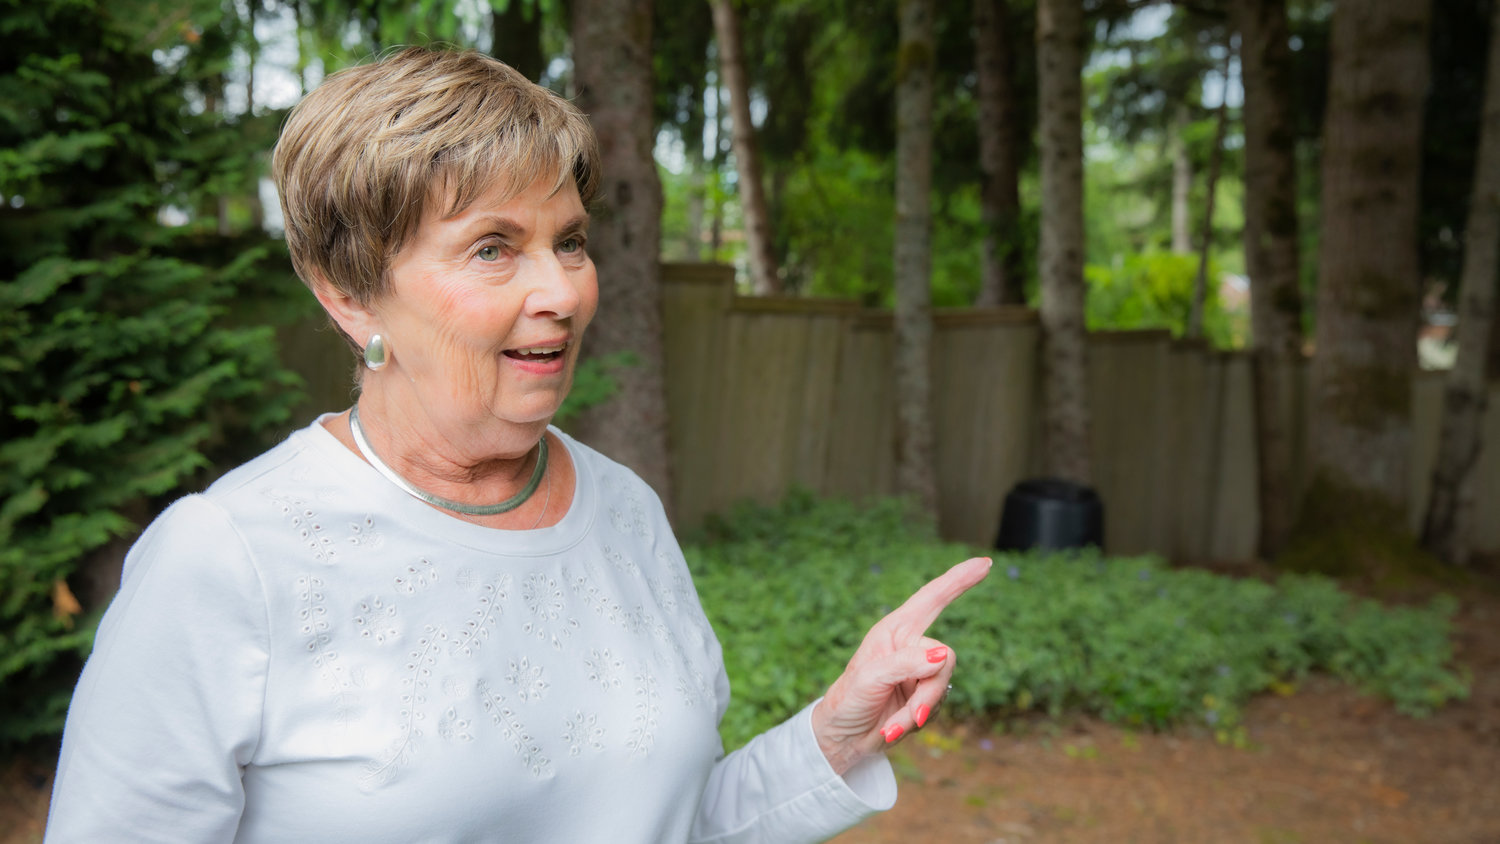 Margie Trentlage points to a crooked fence against trees she says the bear crawled over to get into her yard.